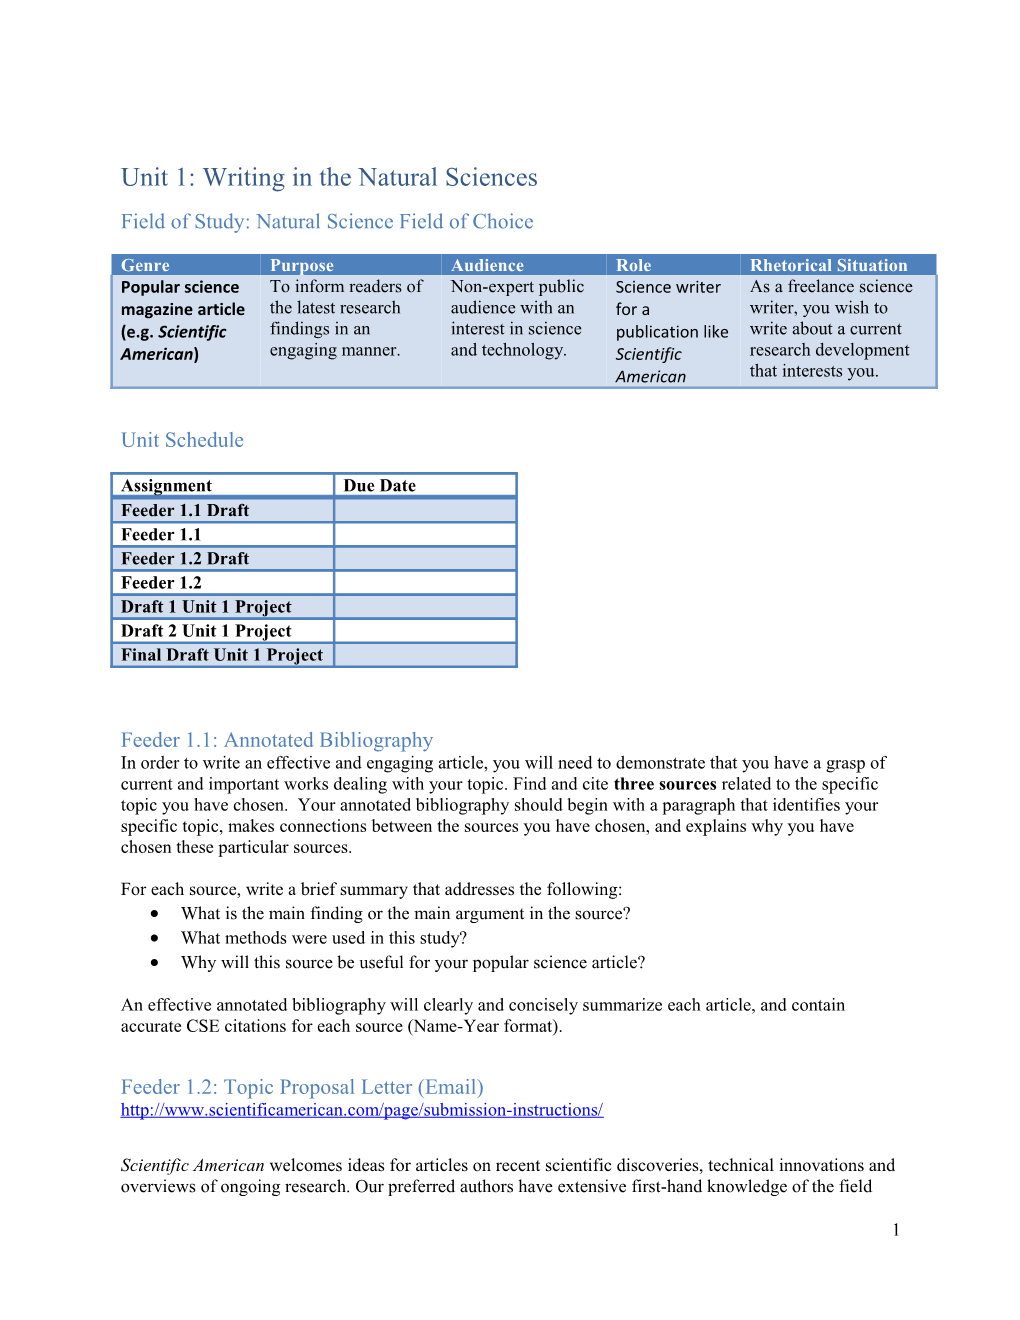 Unit 1: Writing in the Natural Sciences